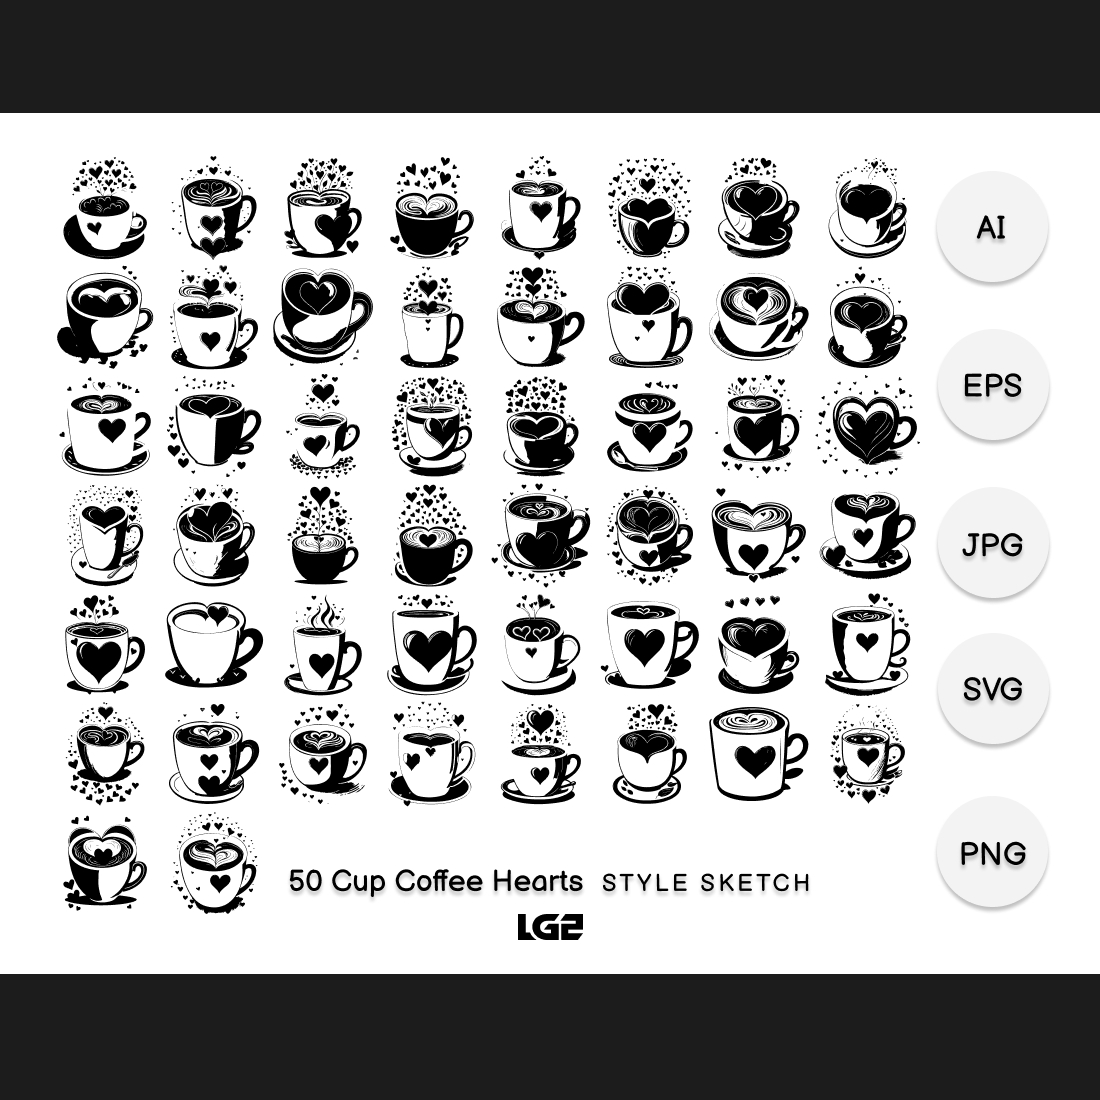 Cup Coffee Hearts Element Draw Black cover image.